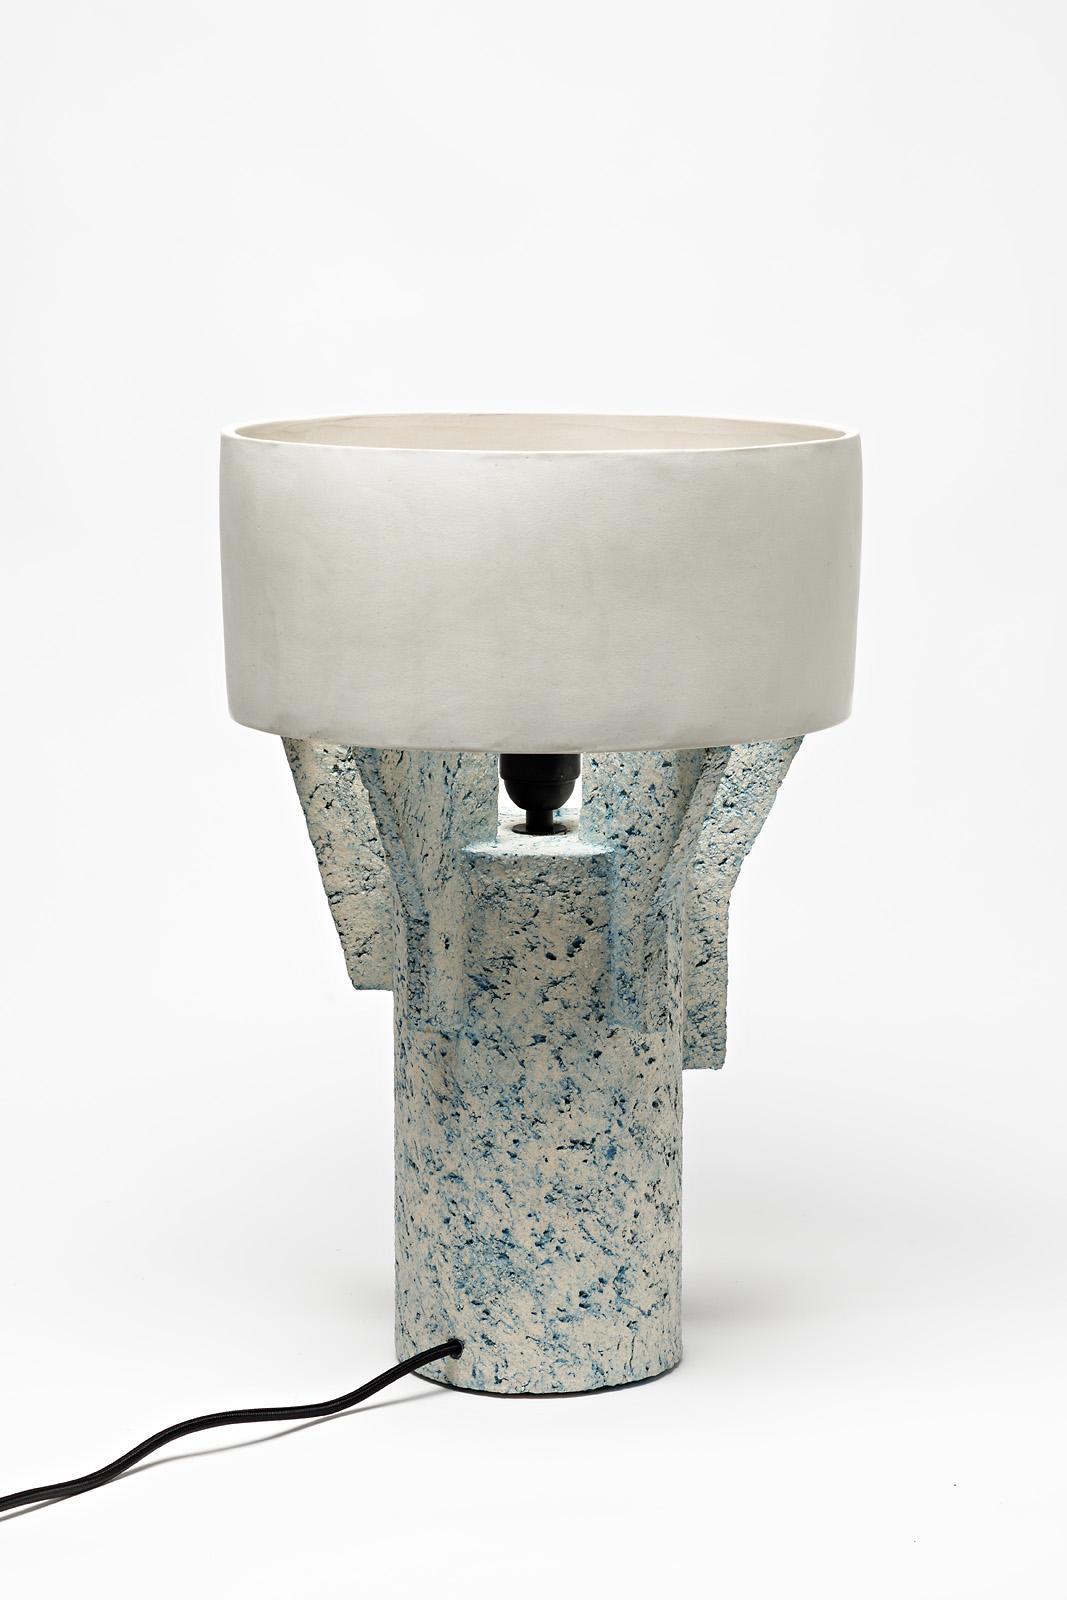 Beaux Arts Ceramic Table Lamp by Denis Castaing with Withe Glaze Decoration, 2019